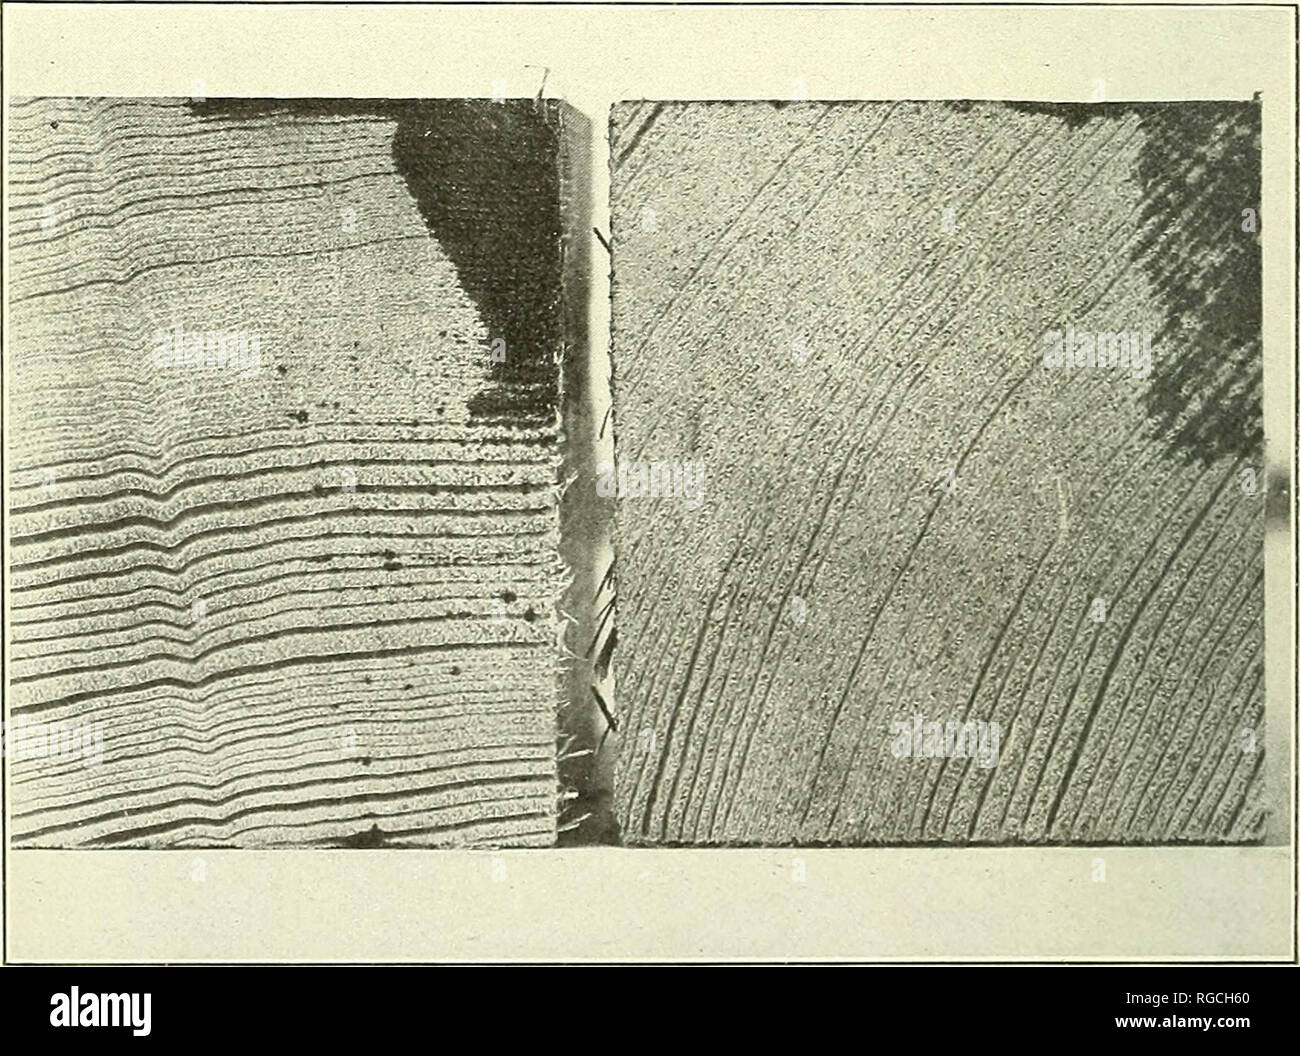 . Bulletin of the U.S. Department of Agriculture. Agriculture; Agriculture. Fig. 1 .—Penetrations in Alpine Fir (Abies lasiocarpa) Heartwood. 1, piece No. 308, treated 30 minutes; 2, piece No. 307, treated 60 minutes; 3, piece No. 309, treated 120 minutes. This species contained no resin ducts or cells and is almost impenetrable.. Fig. 2.—Douglas Fir (Pseudotsuga taxifolia) Treated in Penetrance Apparatus. The piece to the left is sapwood; that to the right is heartwood. The spots on the sapwood piece are treated resin ducts outside of the range of ordinary penetration. They show that the creo Stock Photo